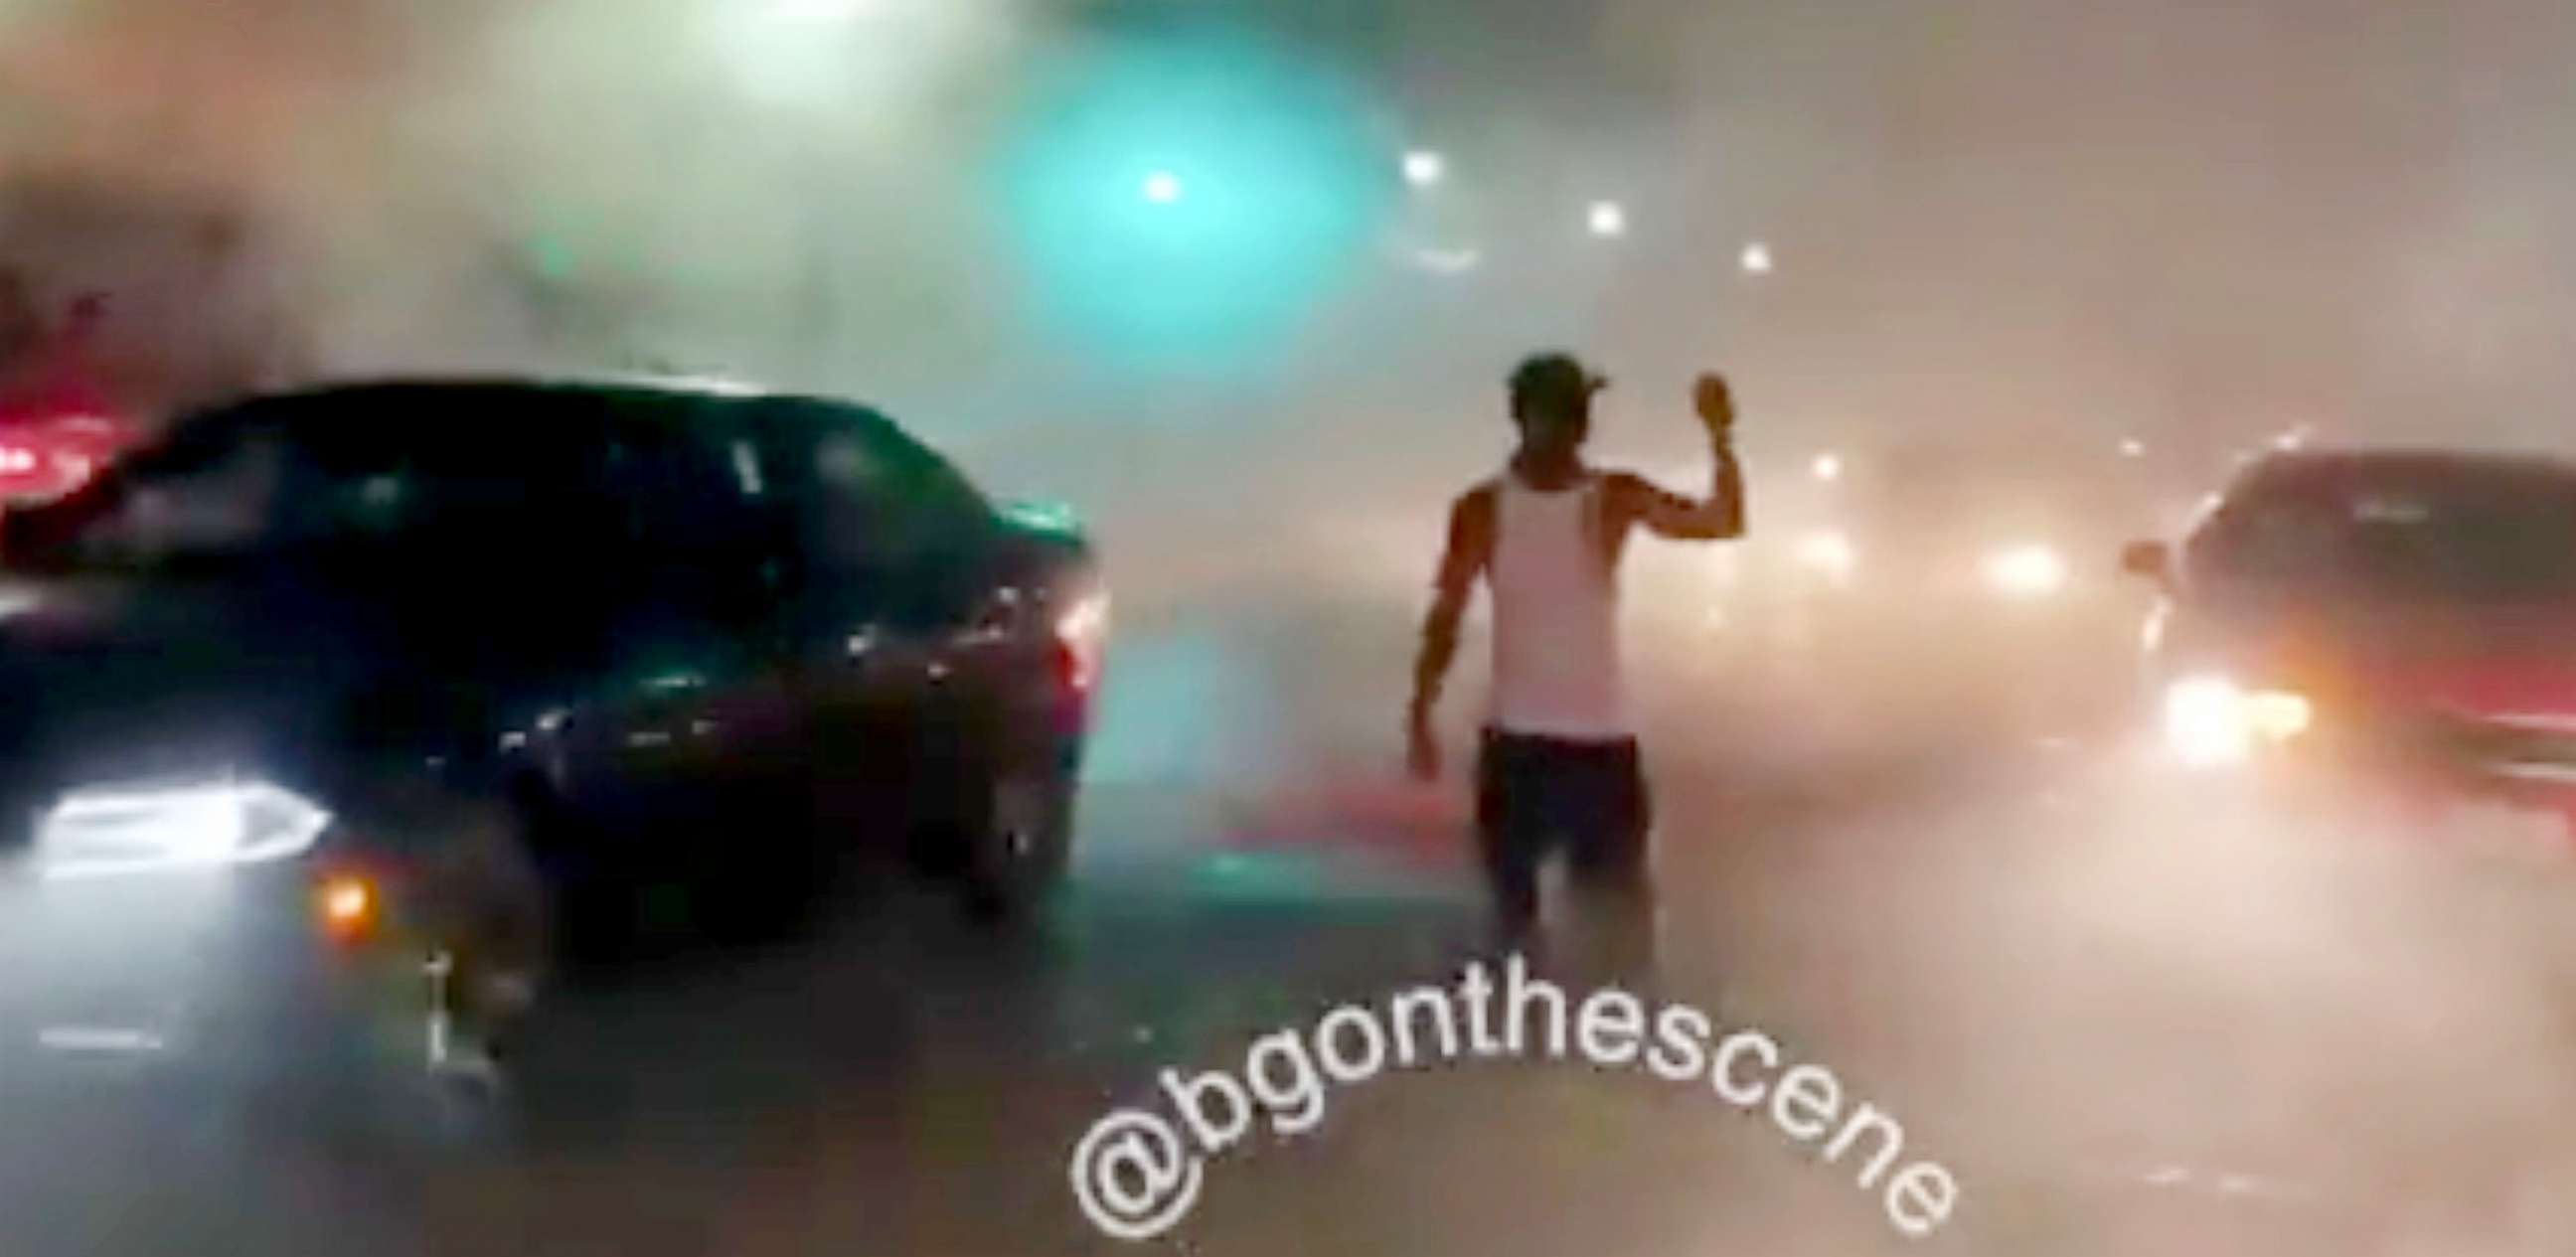 PHOTO: Smoke fills the streets as the crowd ran rampant through this business district,  in a video made by independent videographer Brendan Gutenschwager in Kenosha, Wisc., Aug. 25, 2020.